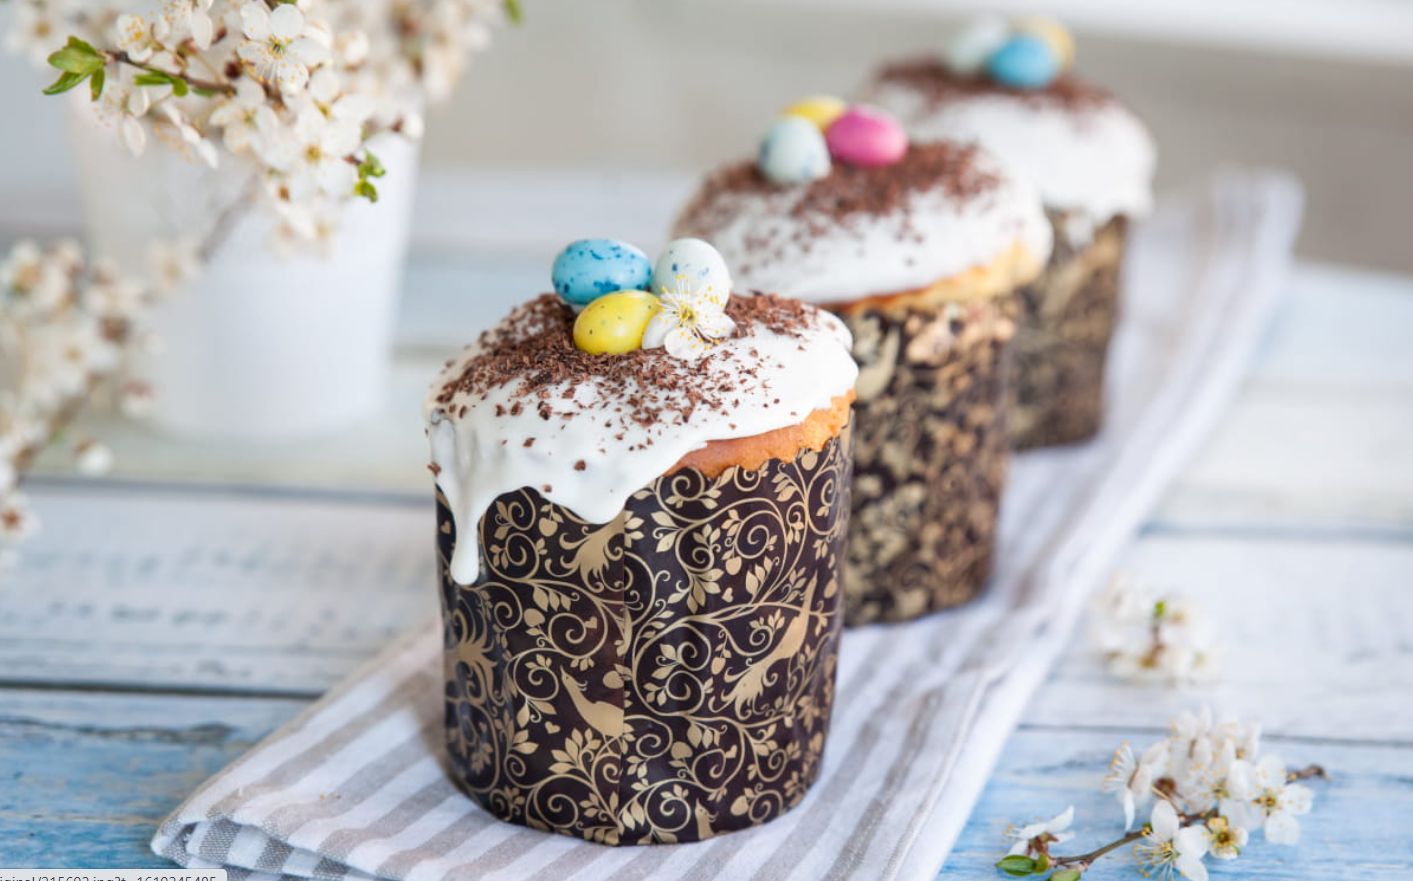 How to make a fluffy Easter cake